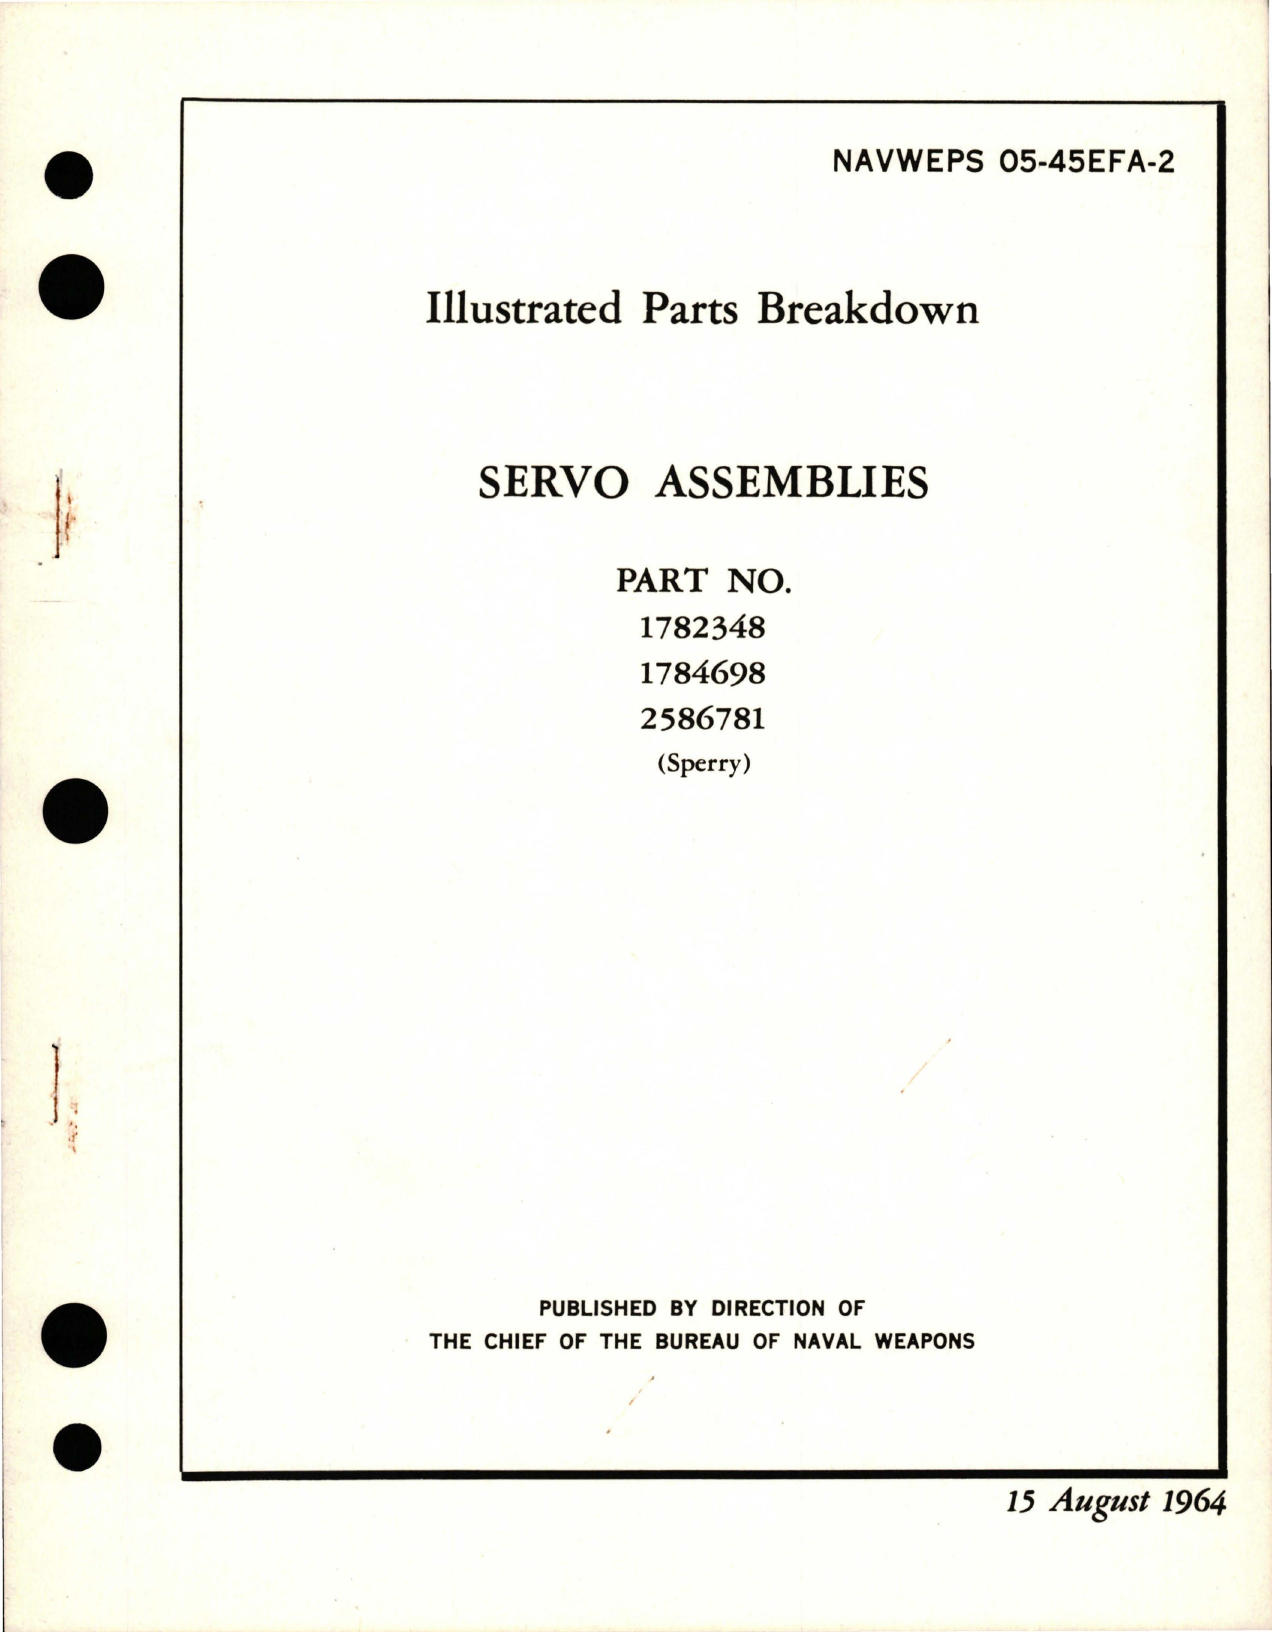 Sample page 1 from AirCorps Library document: Illustrated Parts Breakdown for Servo Assemblies - Parts 1782348, 1784698, and 2586781